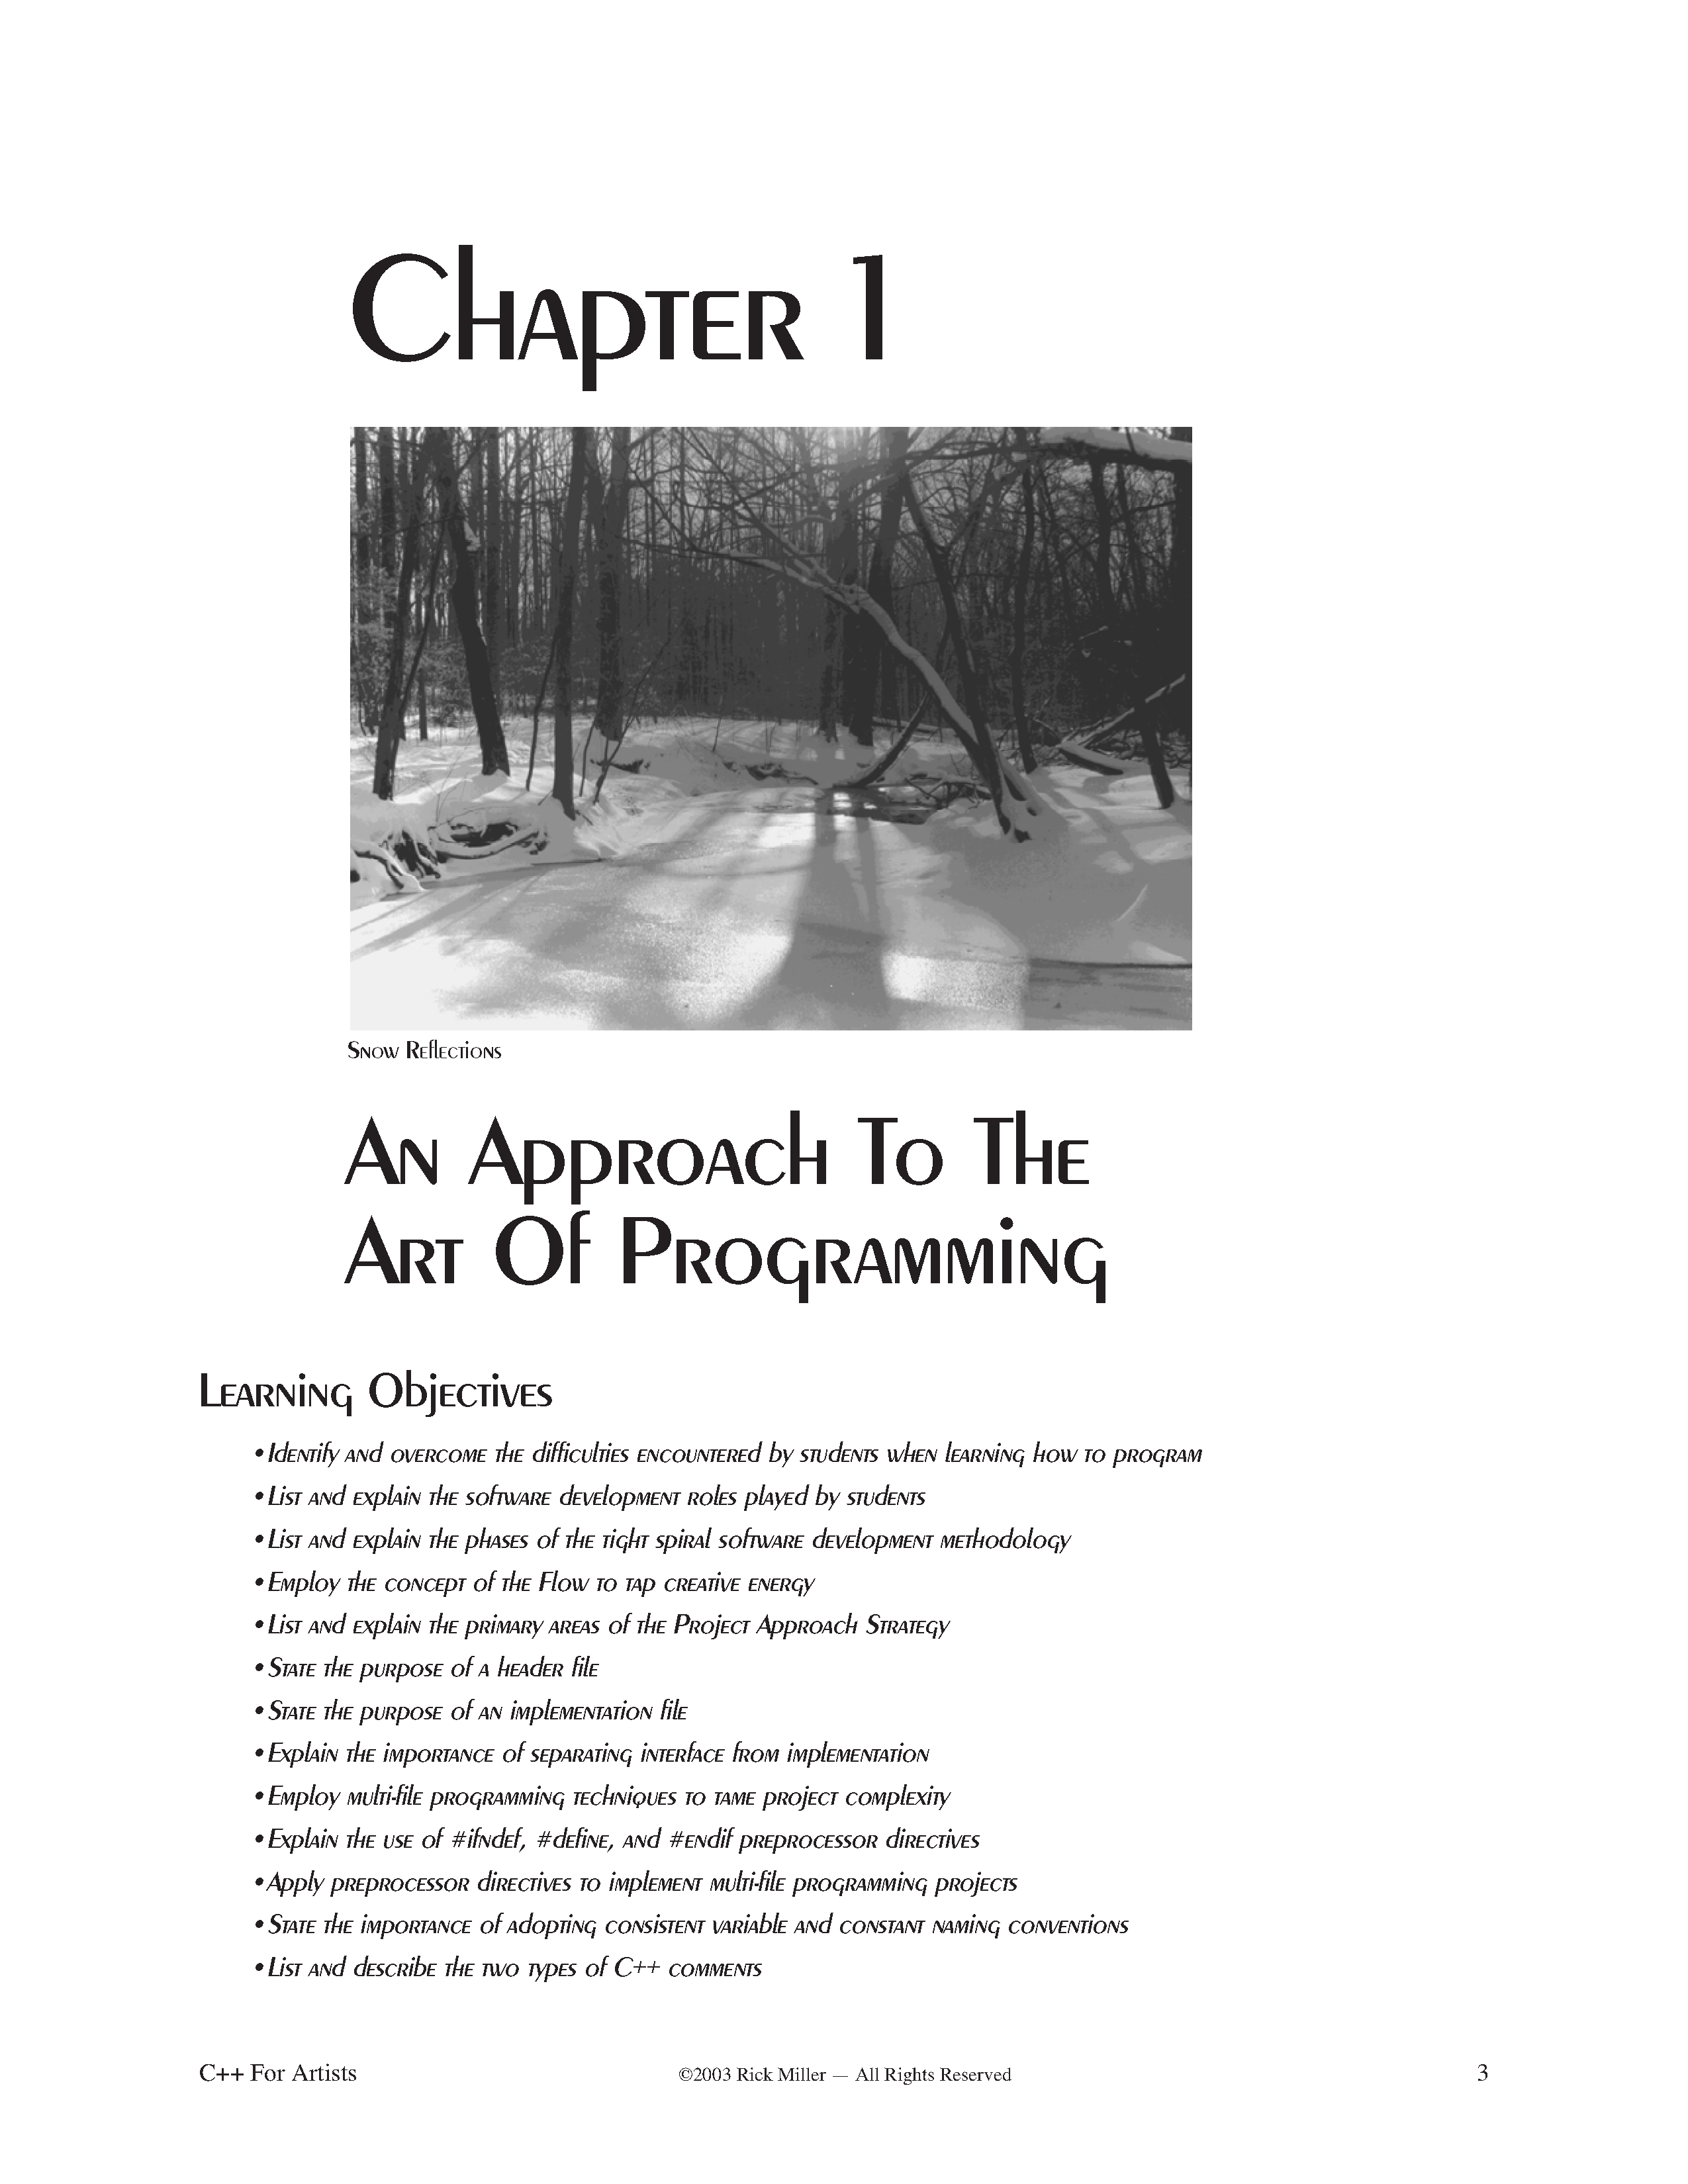 C++ For Artists 1st ED Chapter 1